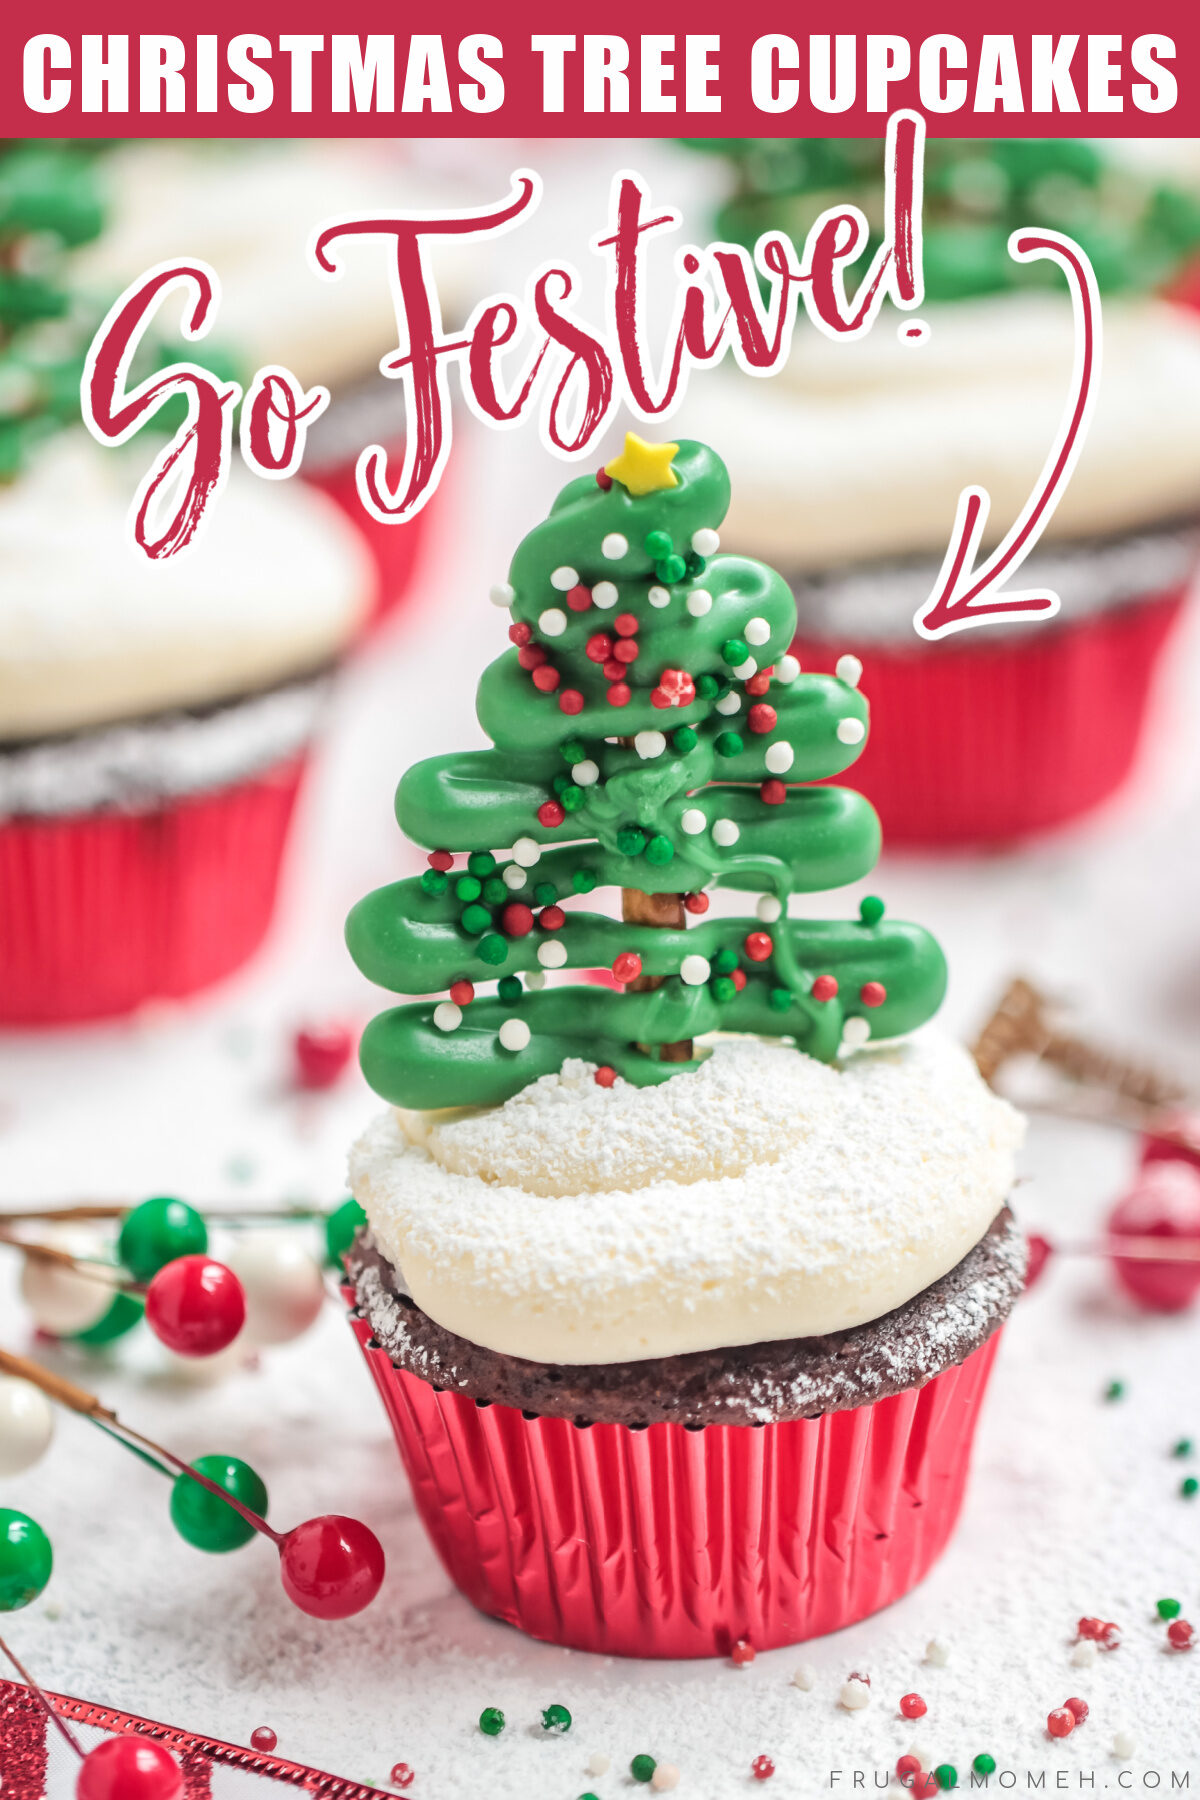 This festive and fun Christmas tree cupcakes recipe make a great treat for the holidays, featuring moist, fluffy homemade chocolate cupcakes!